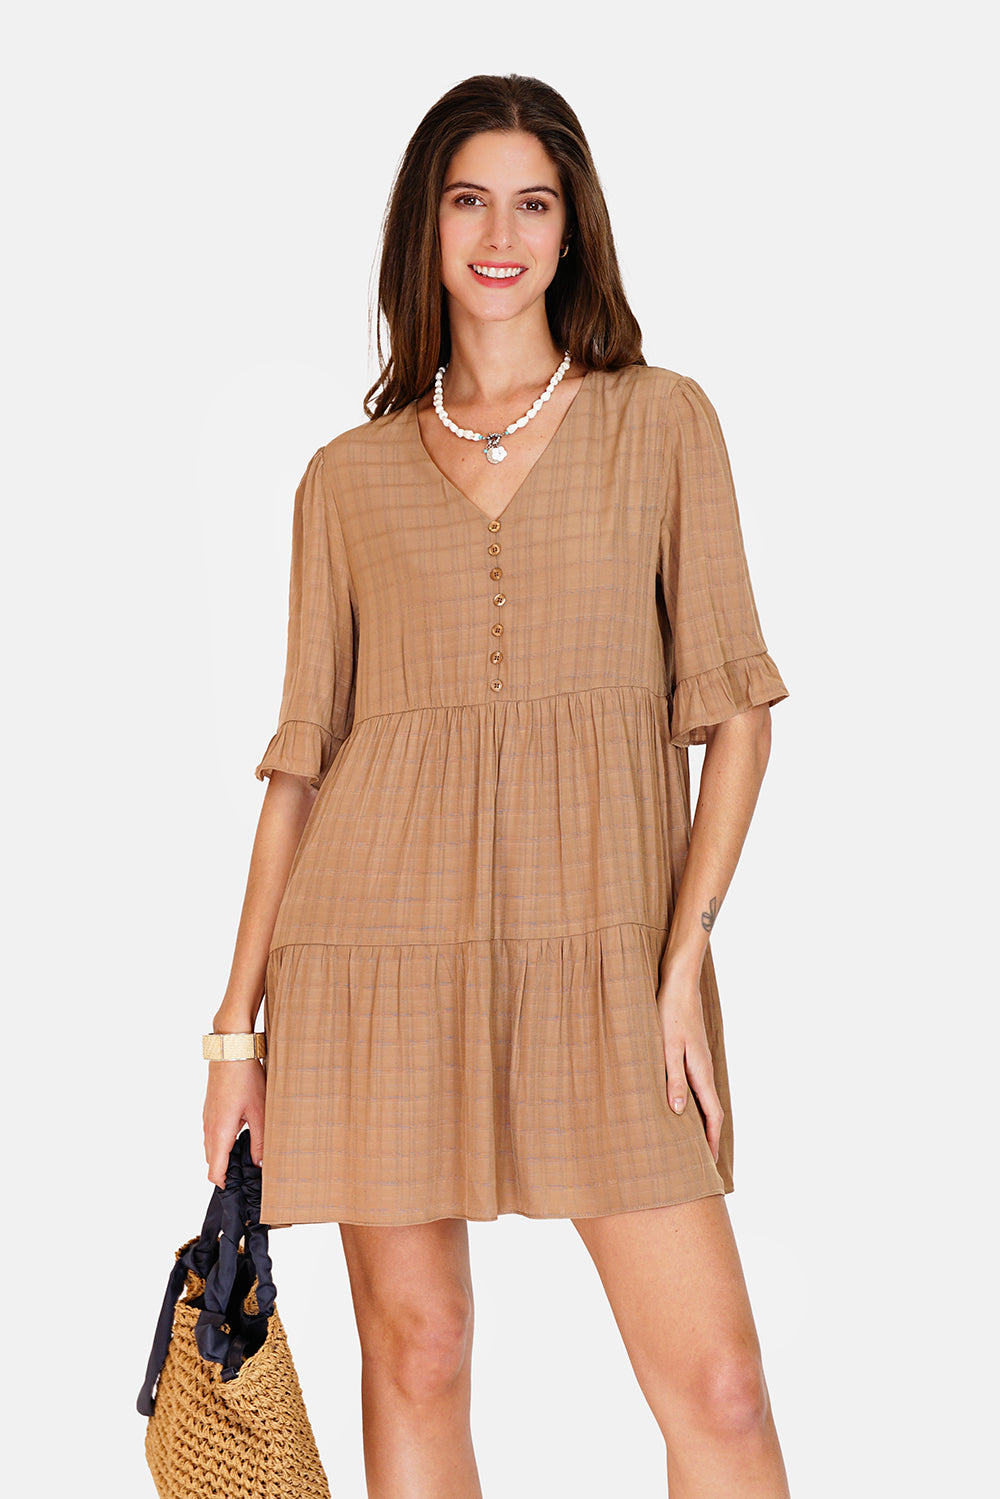 V-neck babydoll dress with 3/4 sleeves